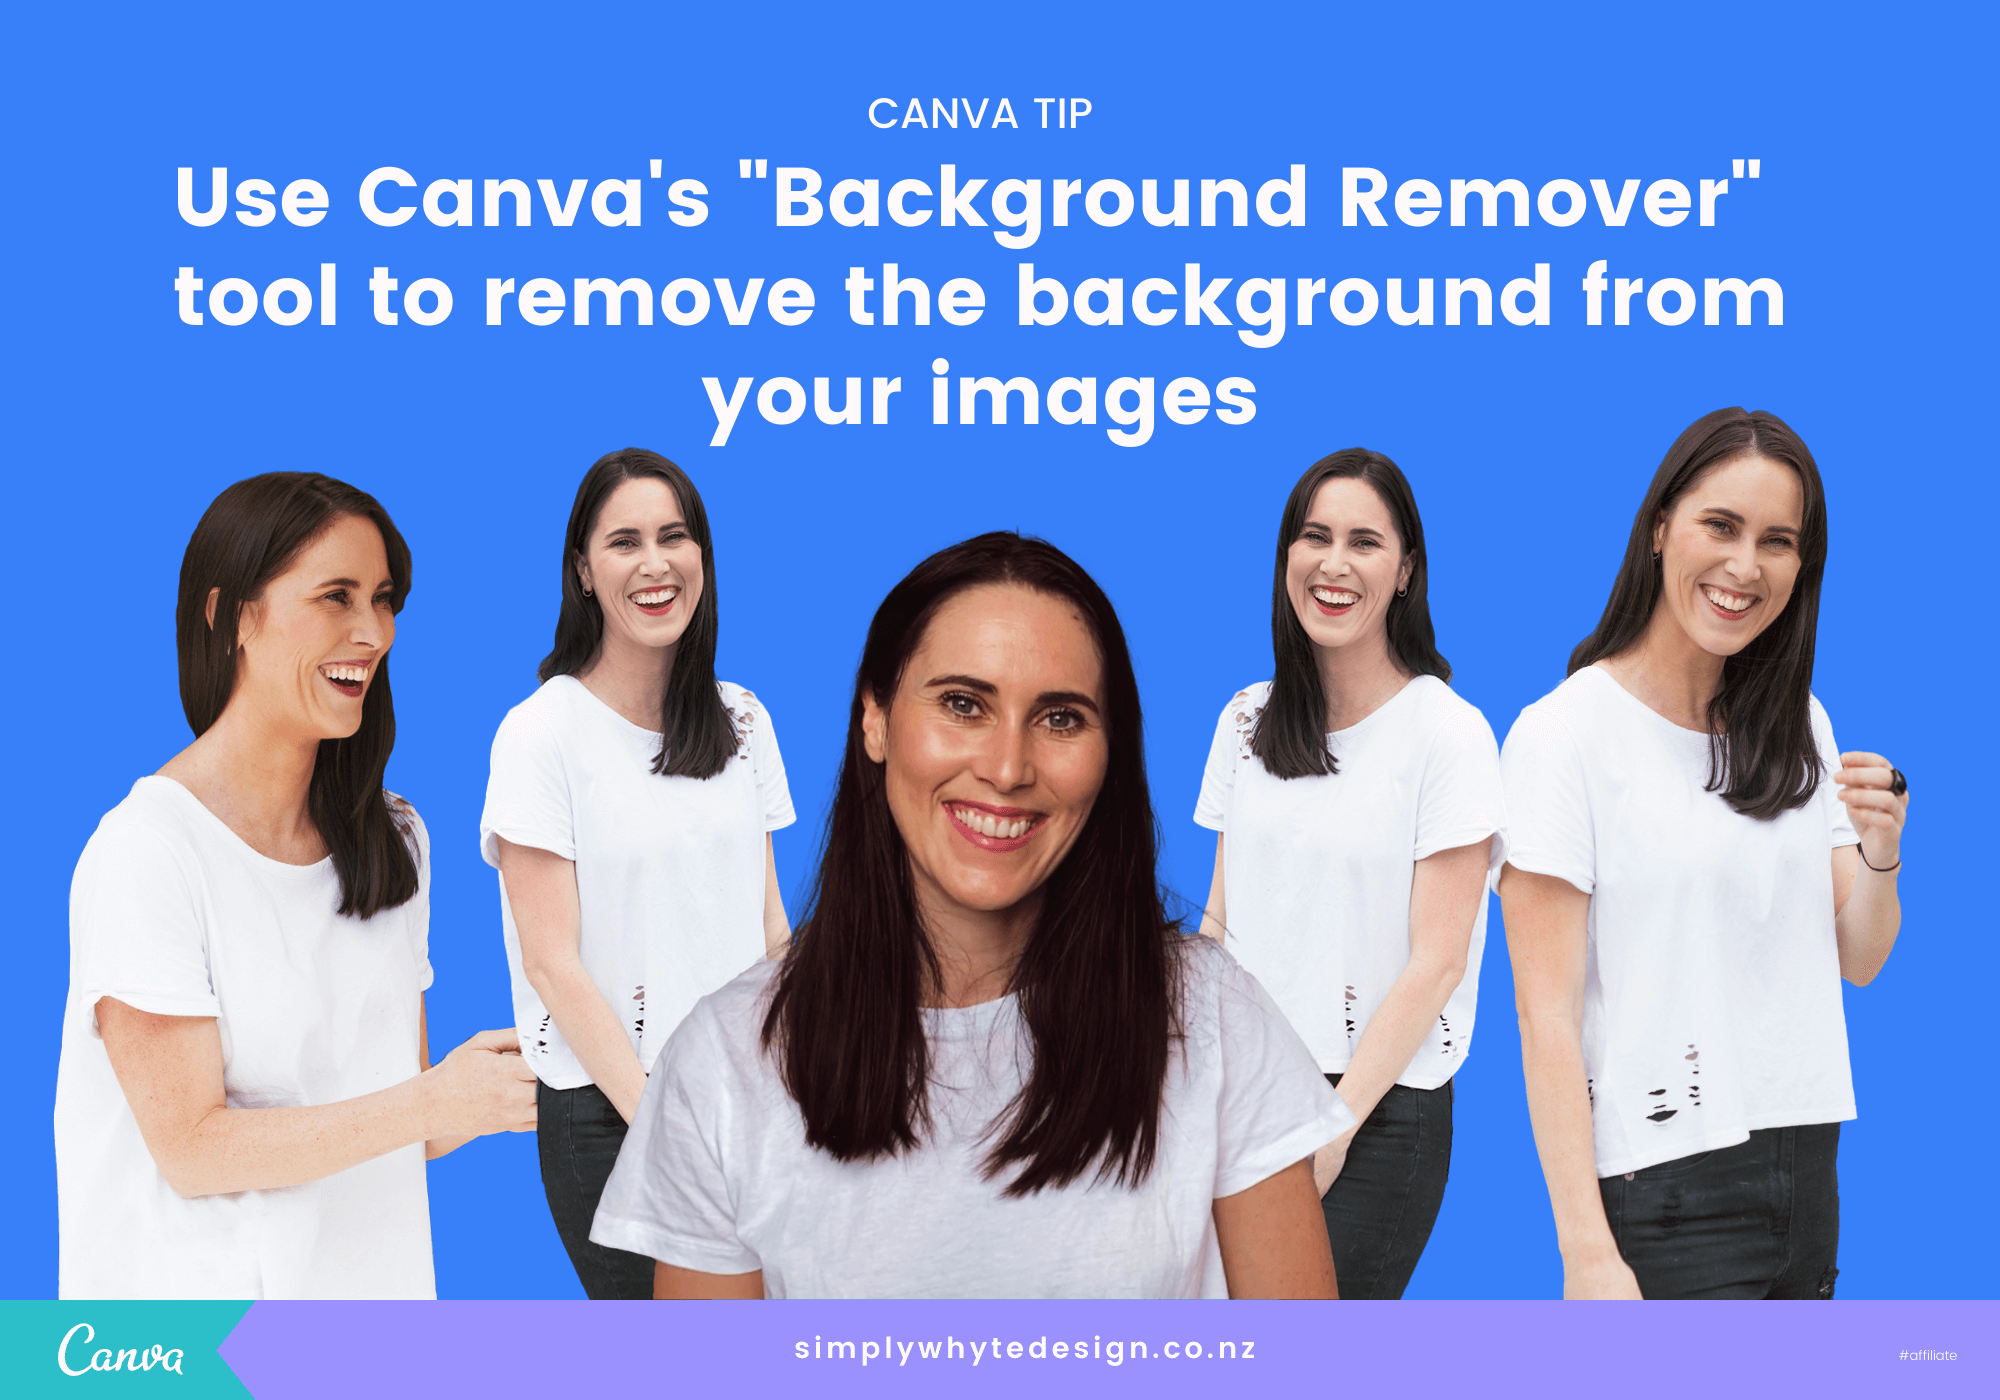 How to remove a background from an image with Canva (No Photoshop needed) —  Simply Whyte Design